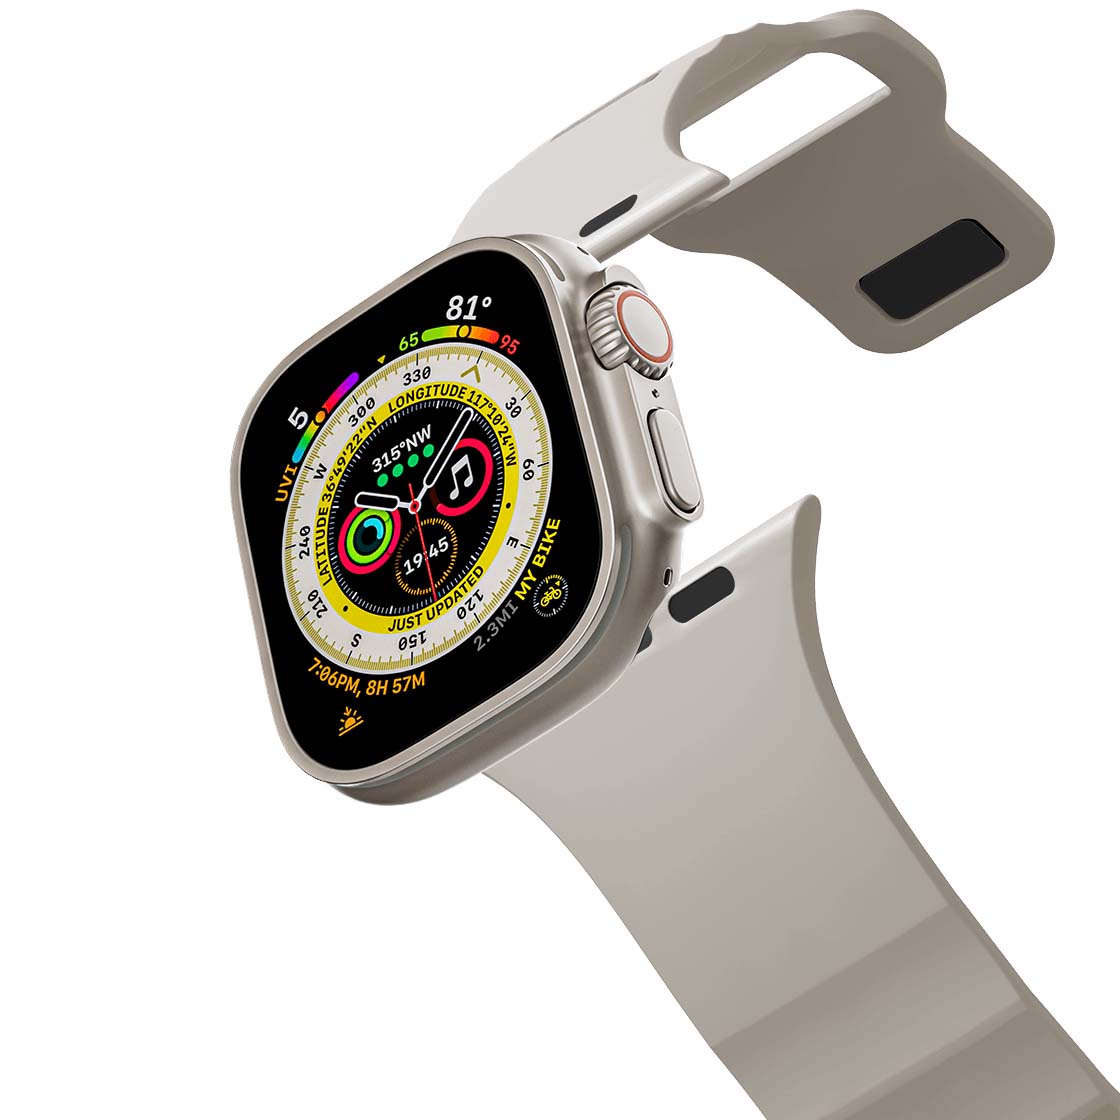 Casetify Bounce Band for Apple Watches in the color sand